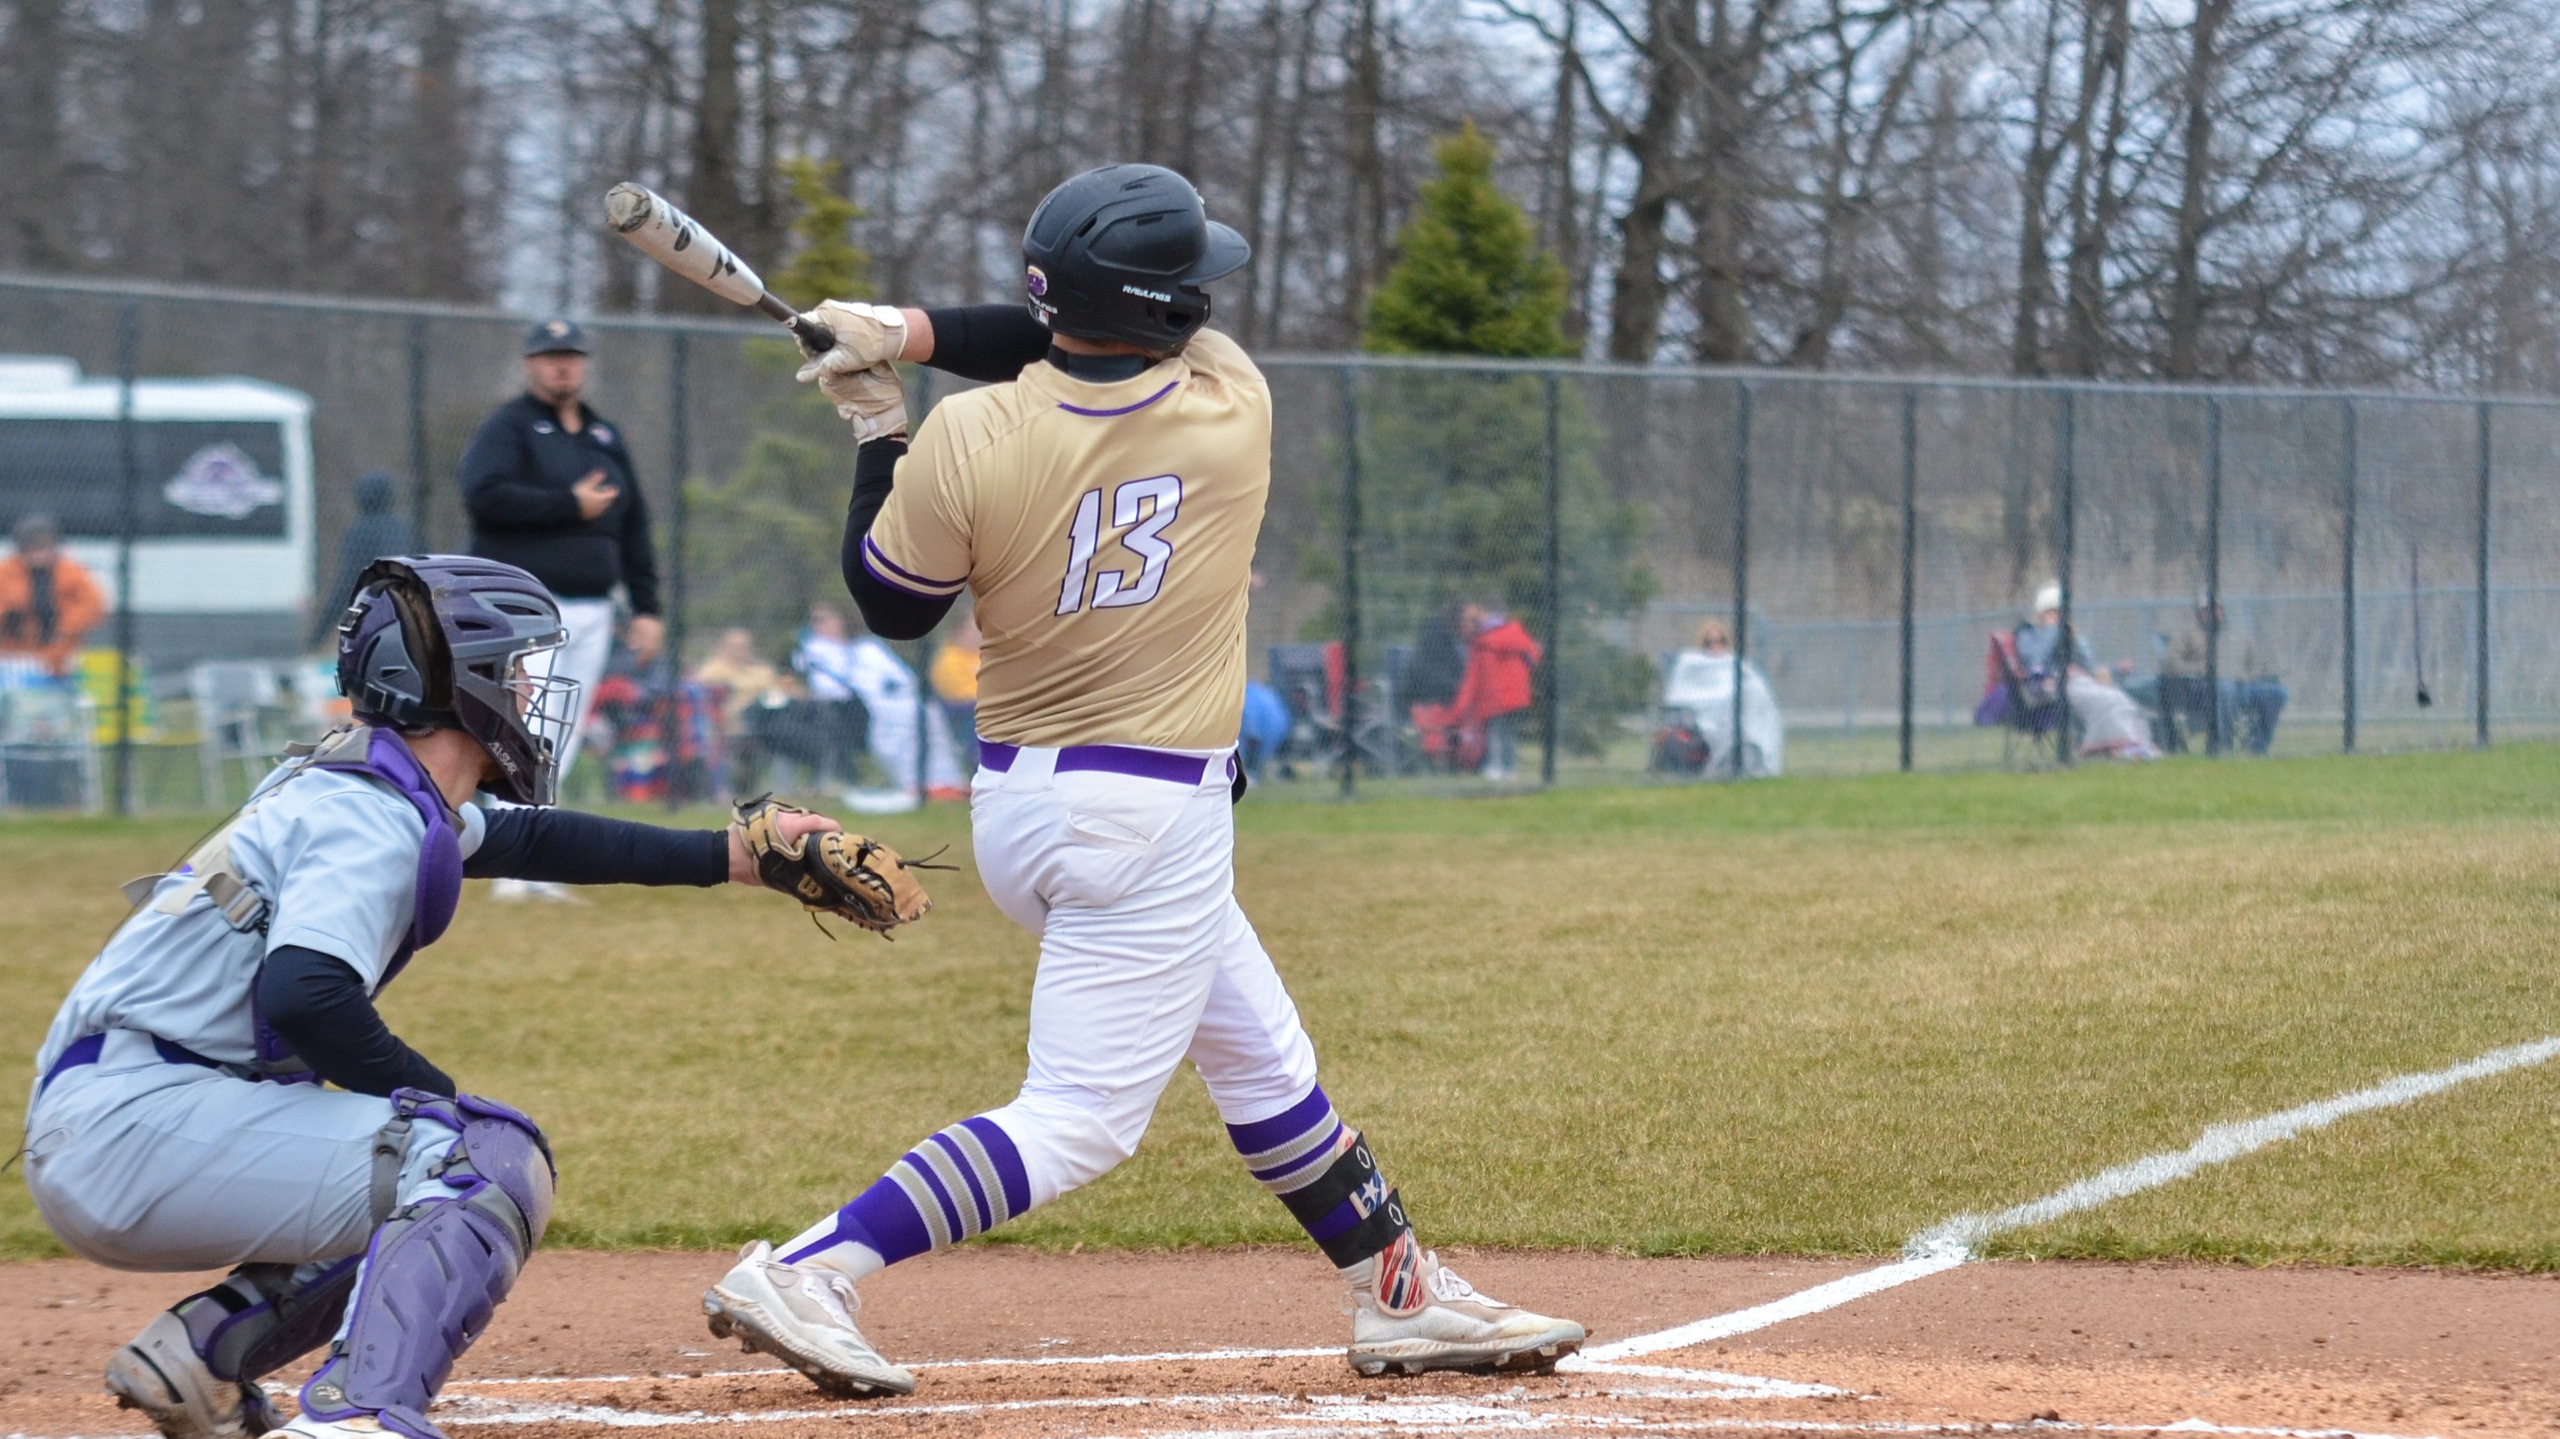 Late-inning ties break for Bluffton in doubleheader sweep at Defiance